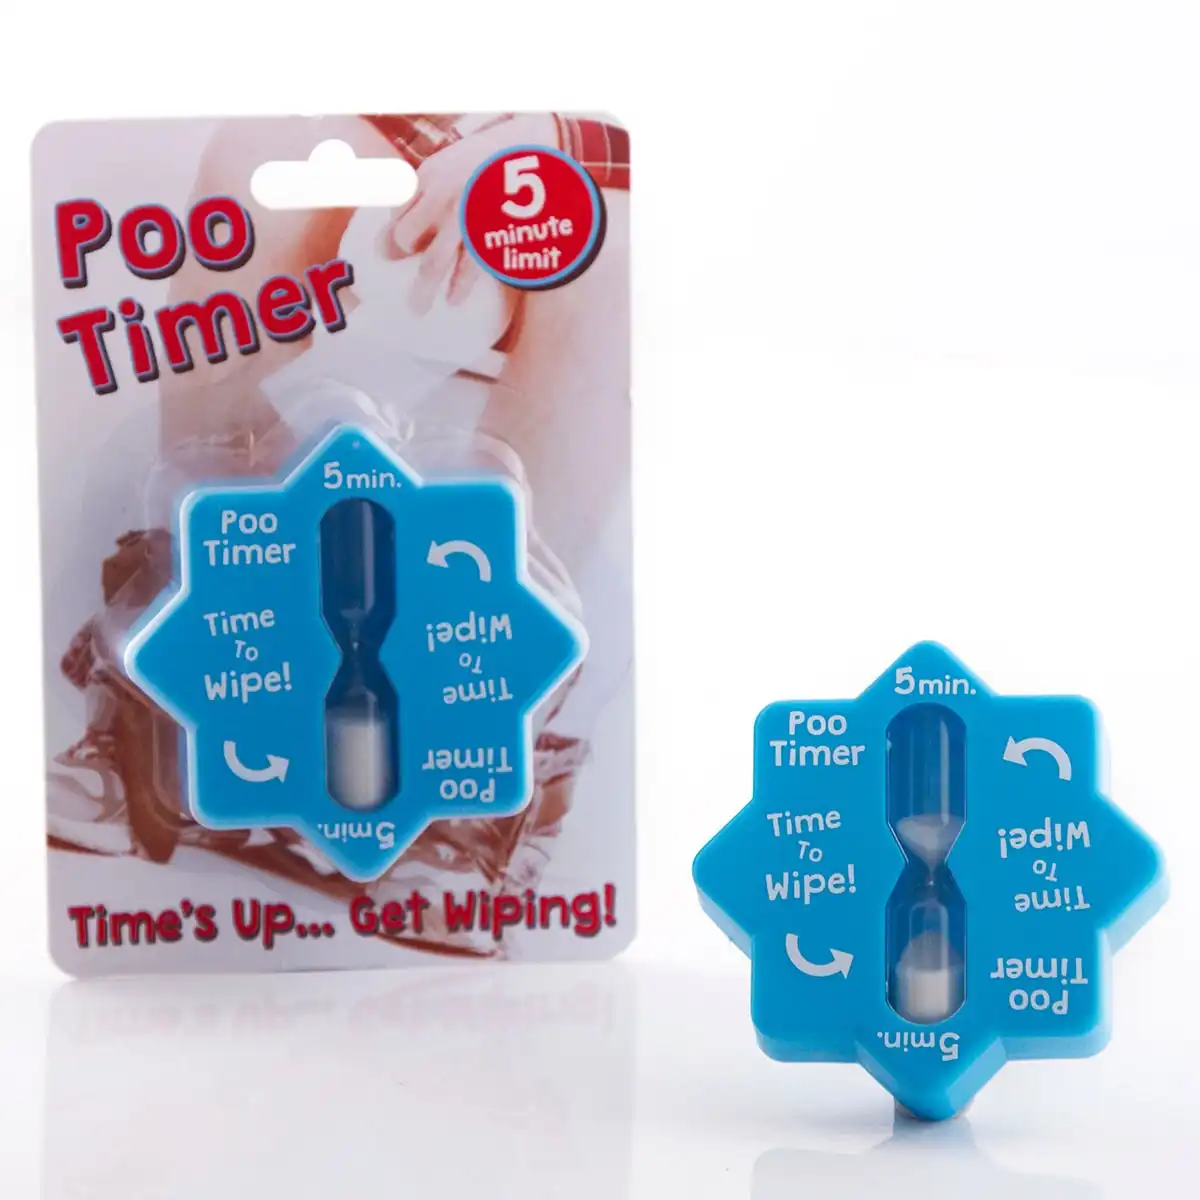 Boxer Gifts - Poo Timer